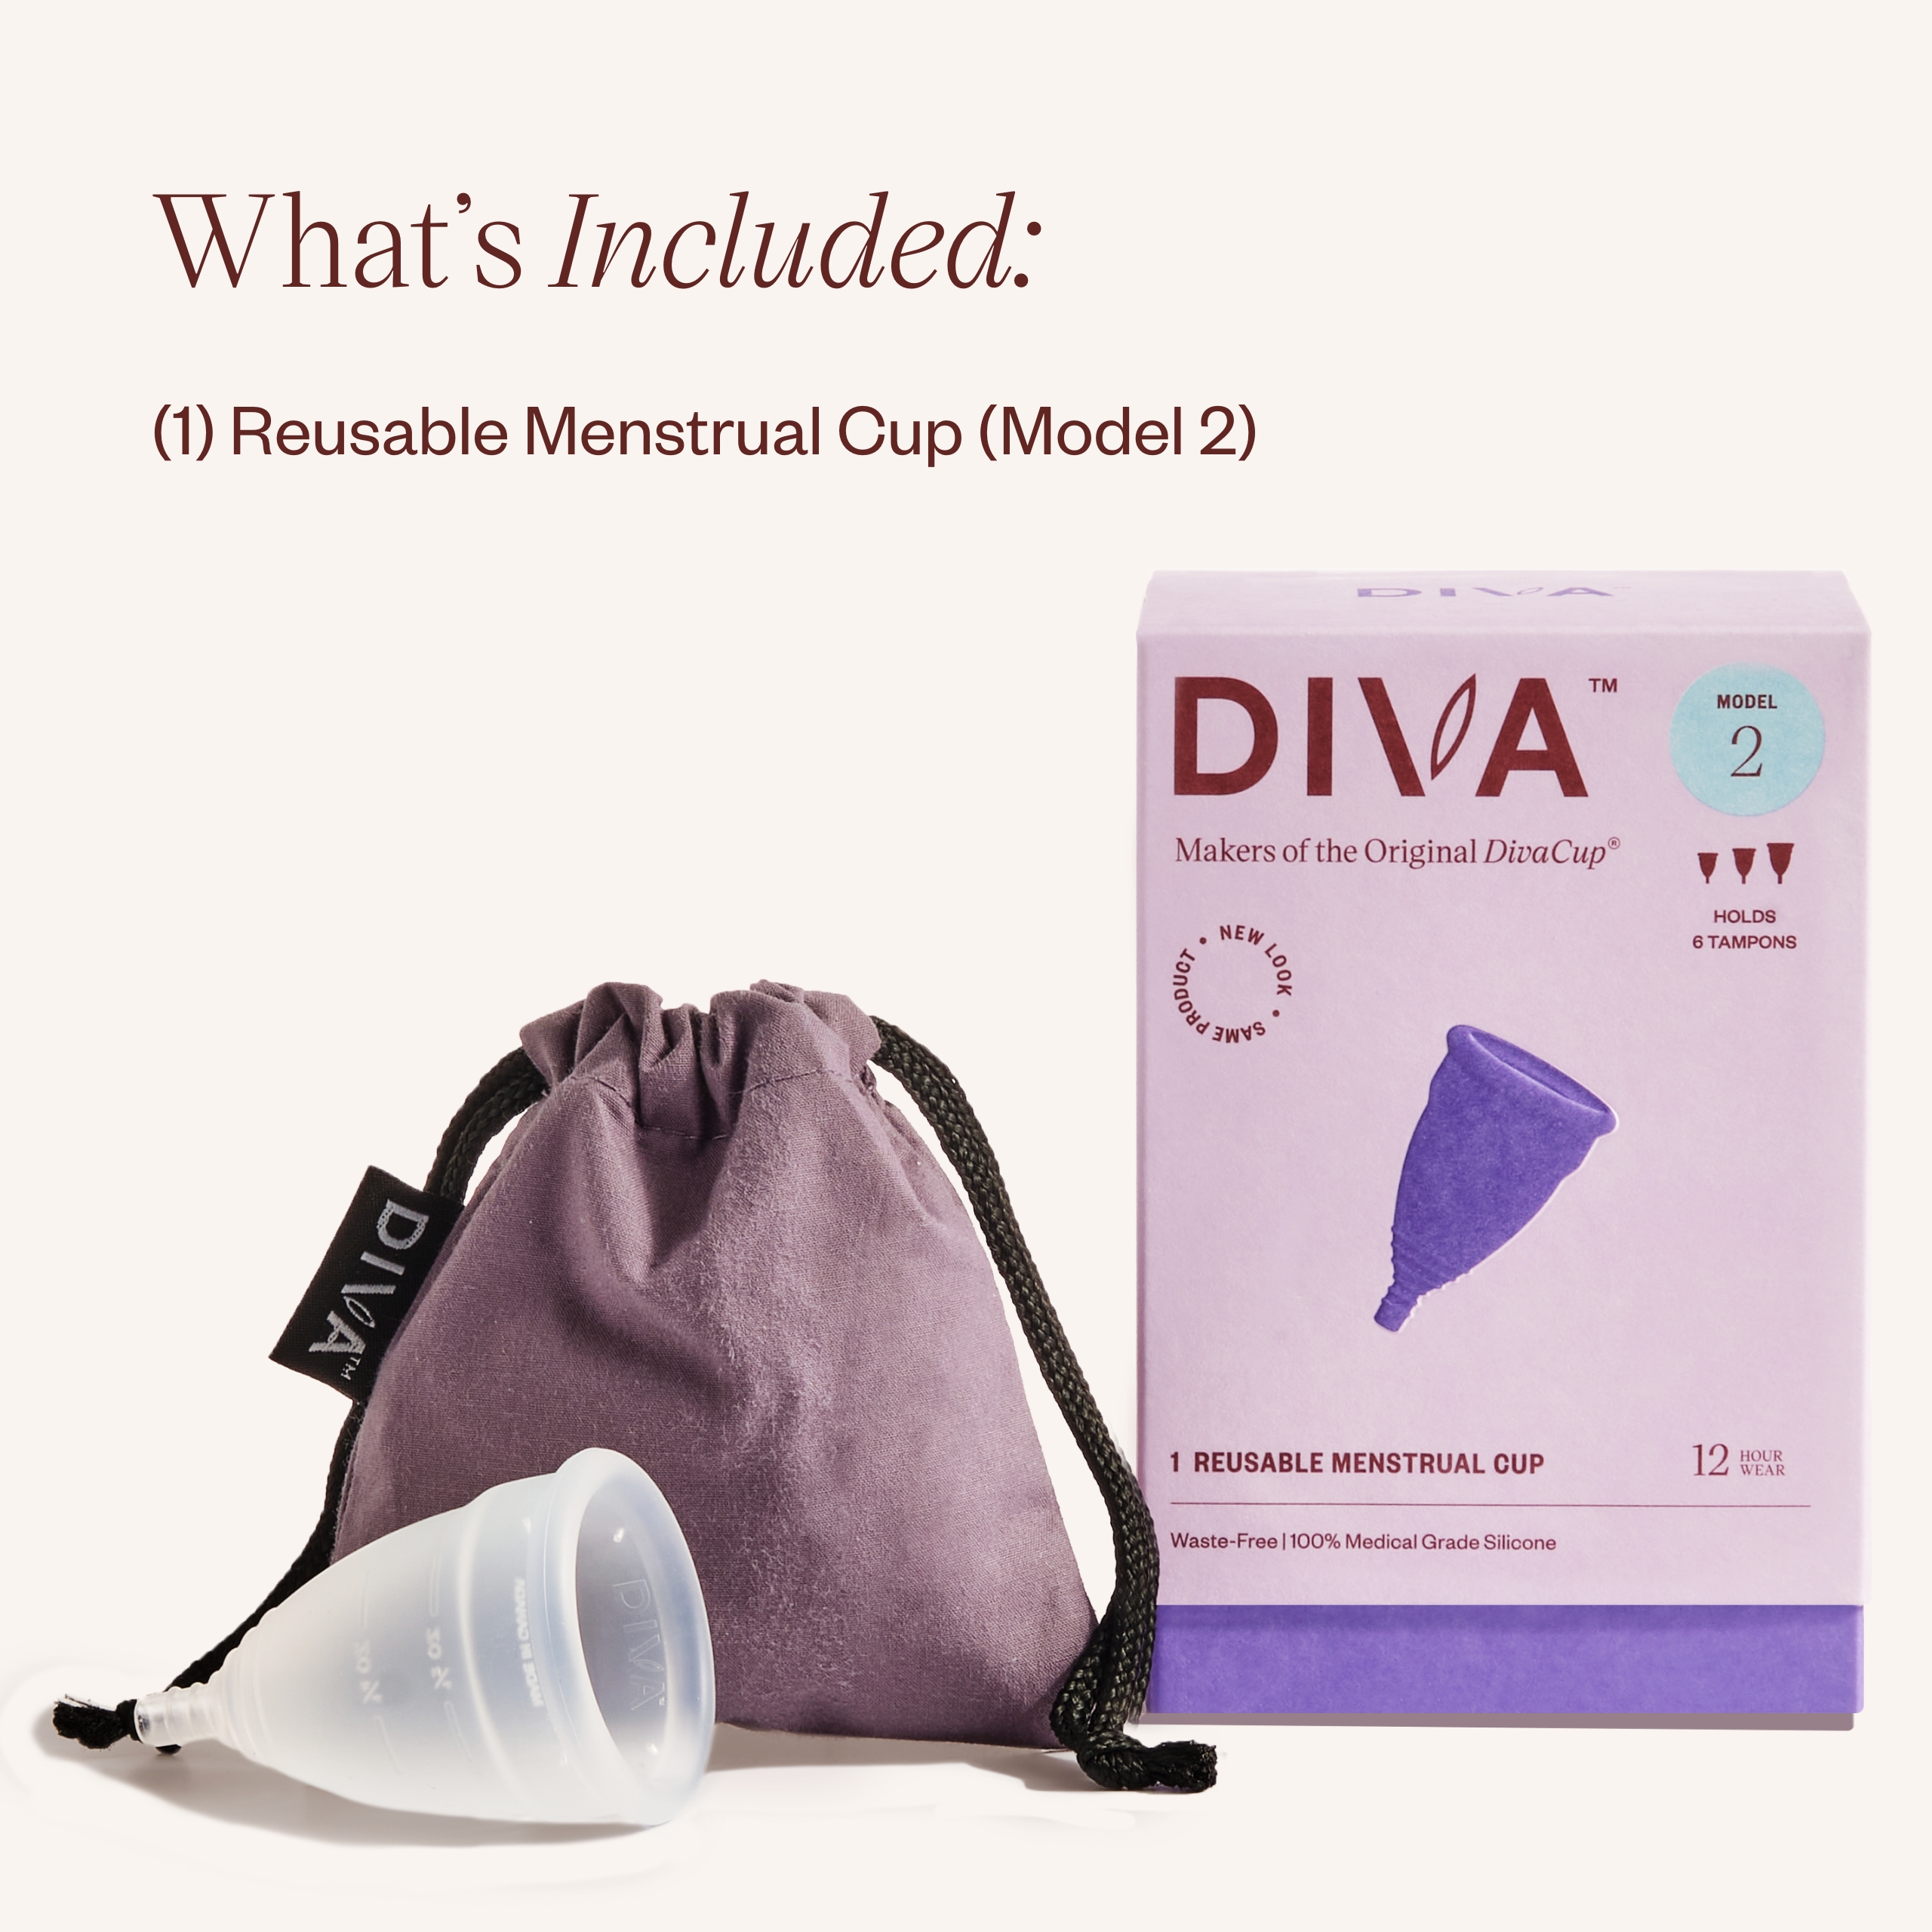 DIVA Cup Model 2 Reusable Menstrual Cup, For Post-Partum & Ages 35+ - image 2 of 7